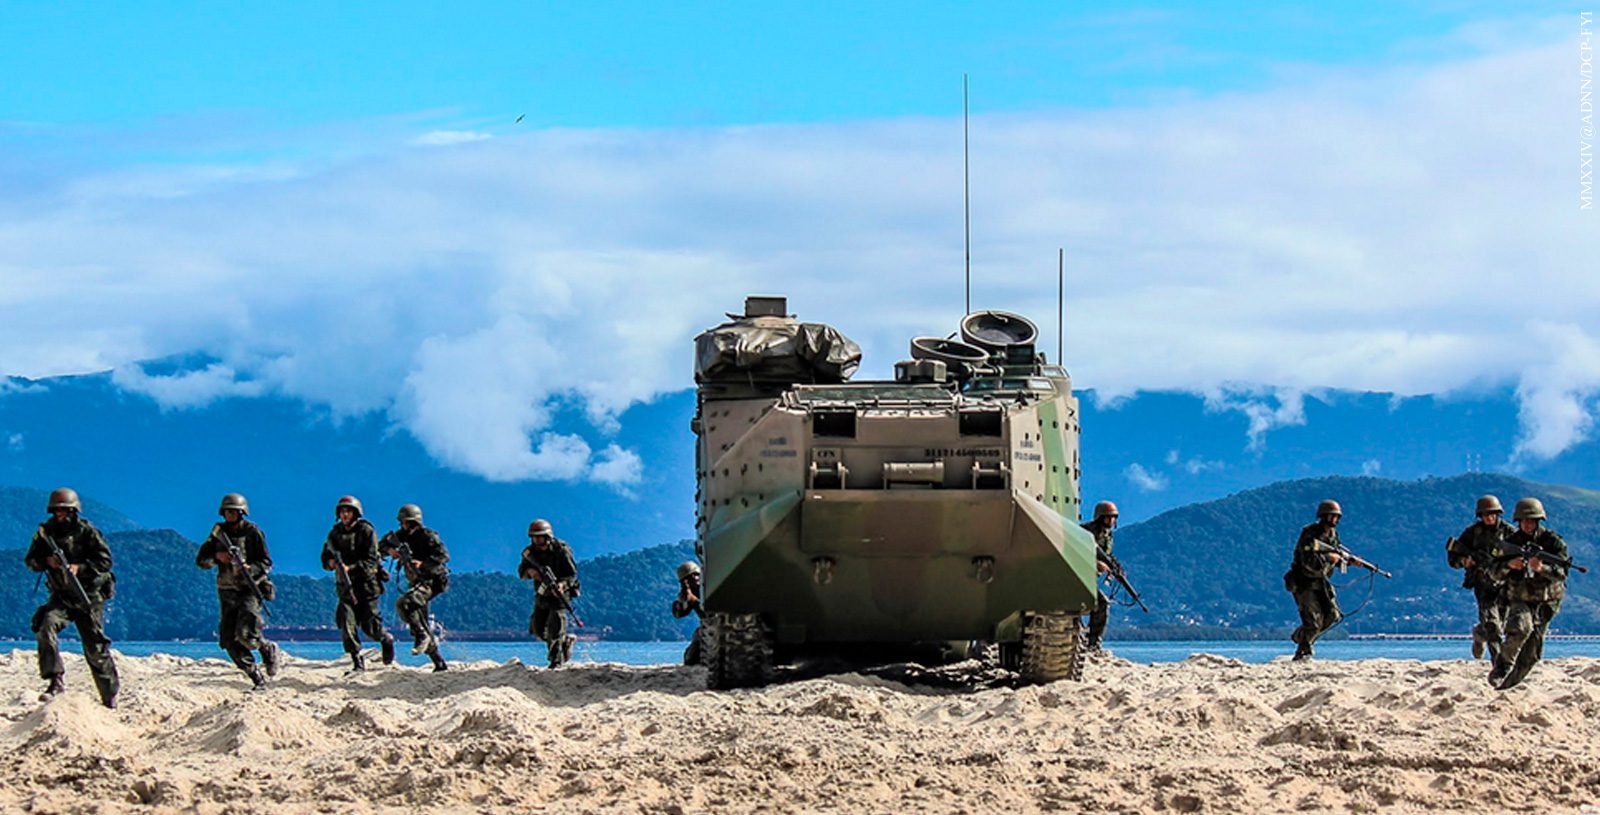 "In the vanguard of honor and duty!": meet the elite troops of the Brazilian Navy